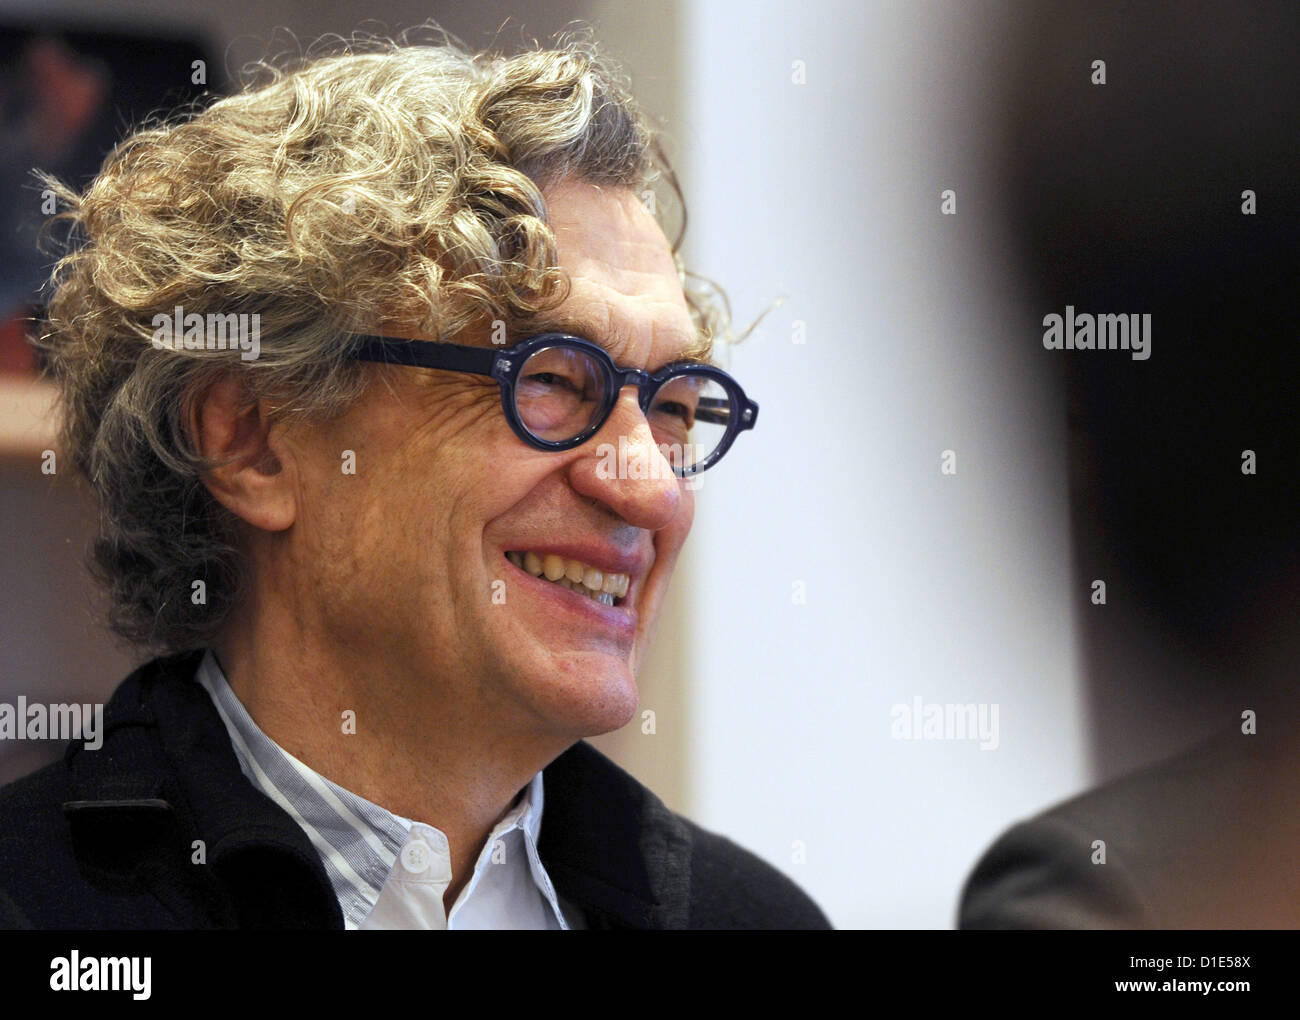 Film director Wim Wenders speaks at the press conference in Duesseldorf, Germany, 14 December 2012. The director introduced his new Wim Wenders Foundation. The foundation should archive and research the complete works of Wenders. Photo: Daniel Naupold Stock Photo